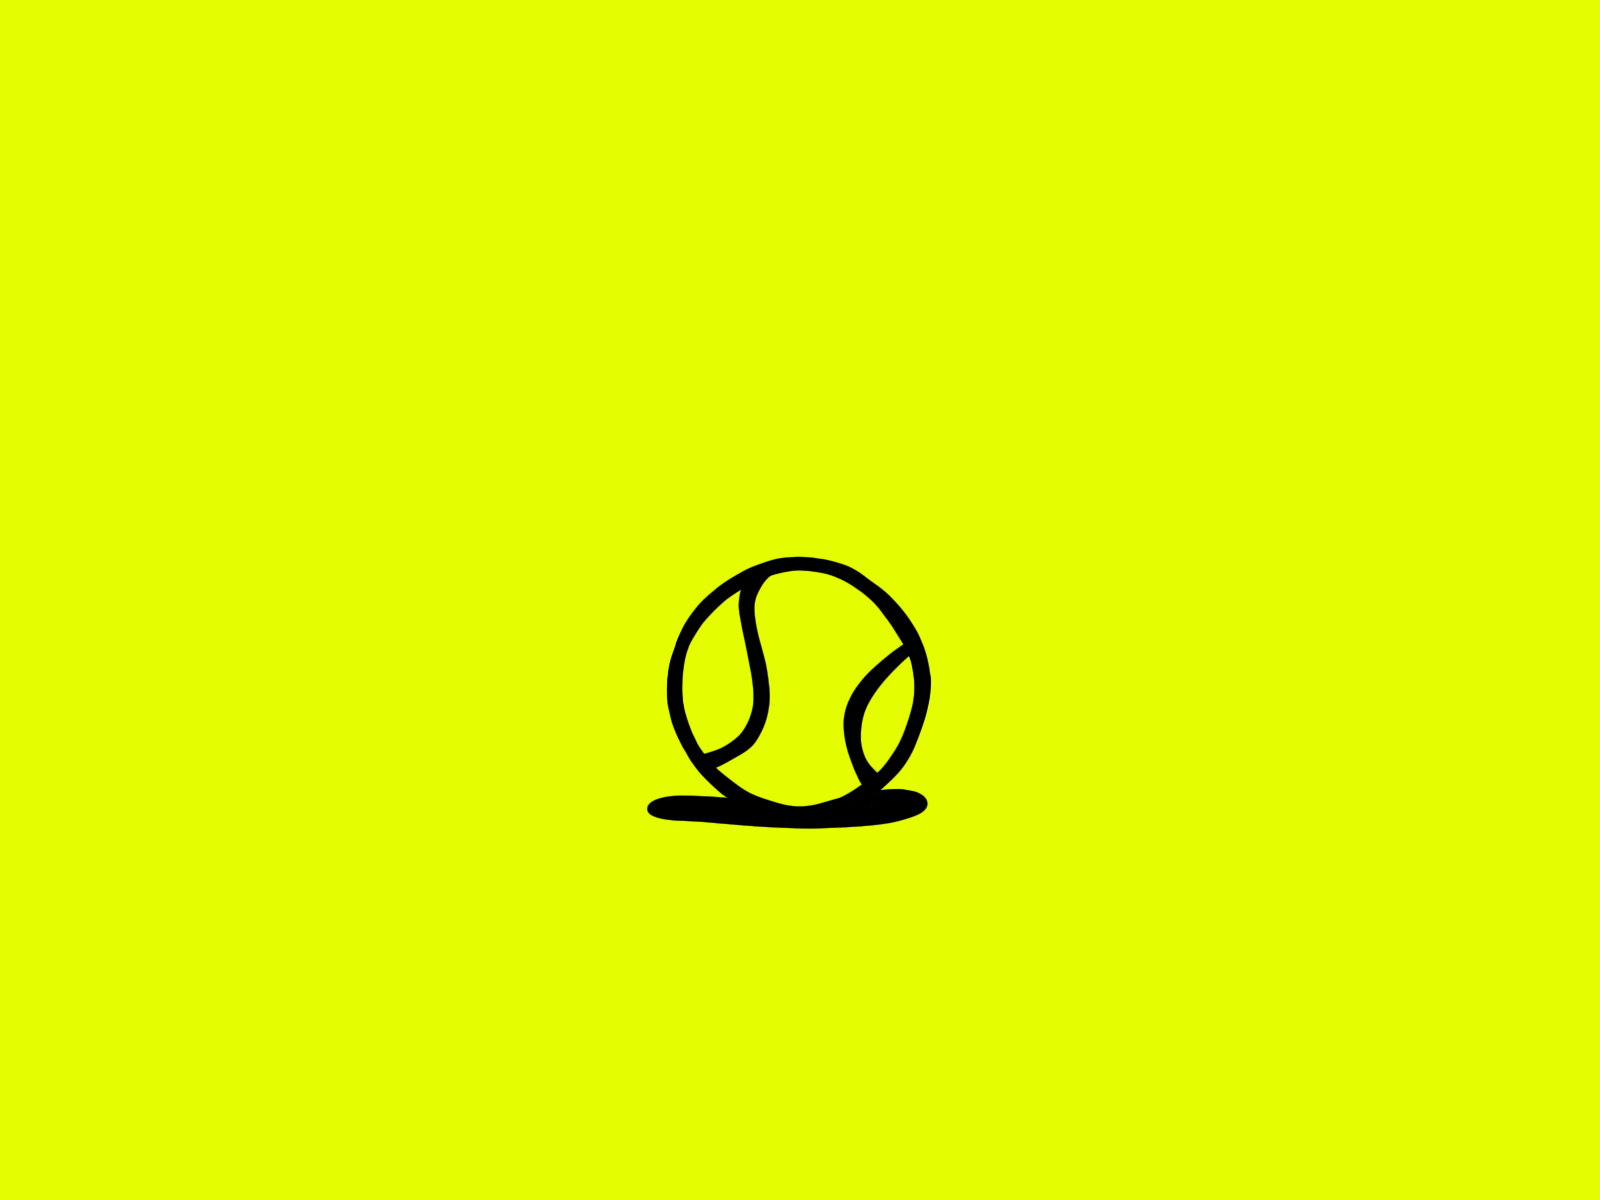 Bouncing ball animation ball design drawing field lovely match photoshop play sports tennis traditional yellow